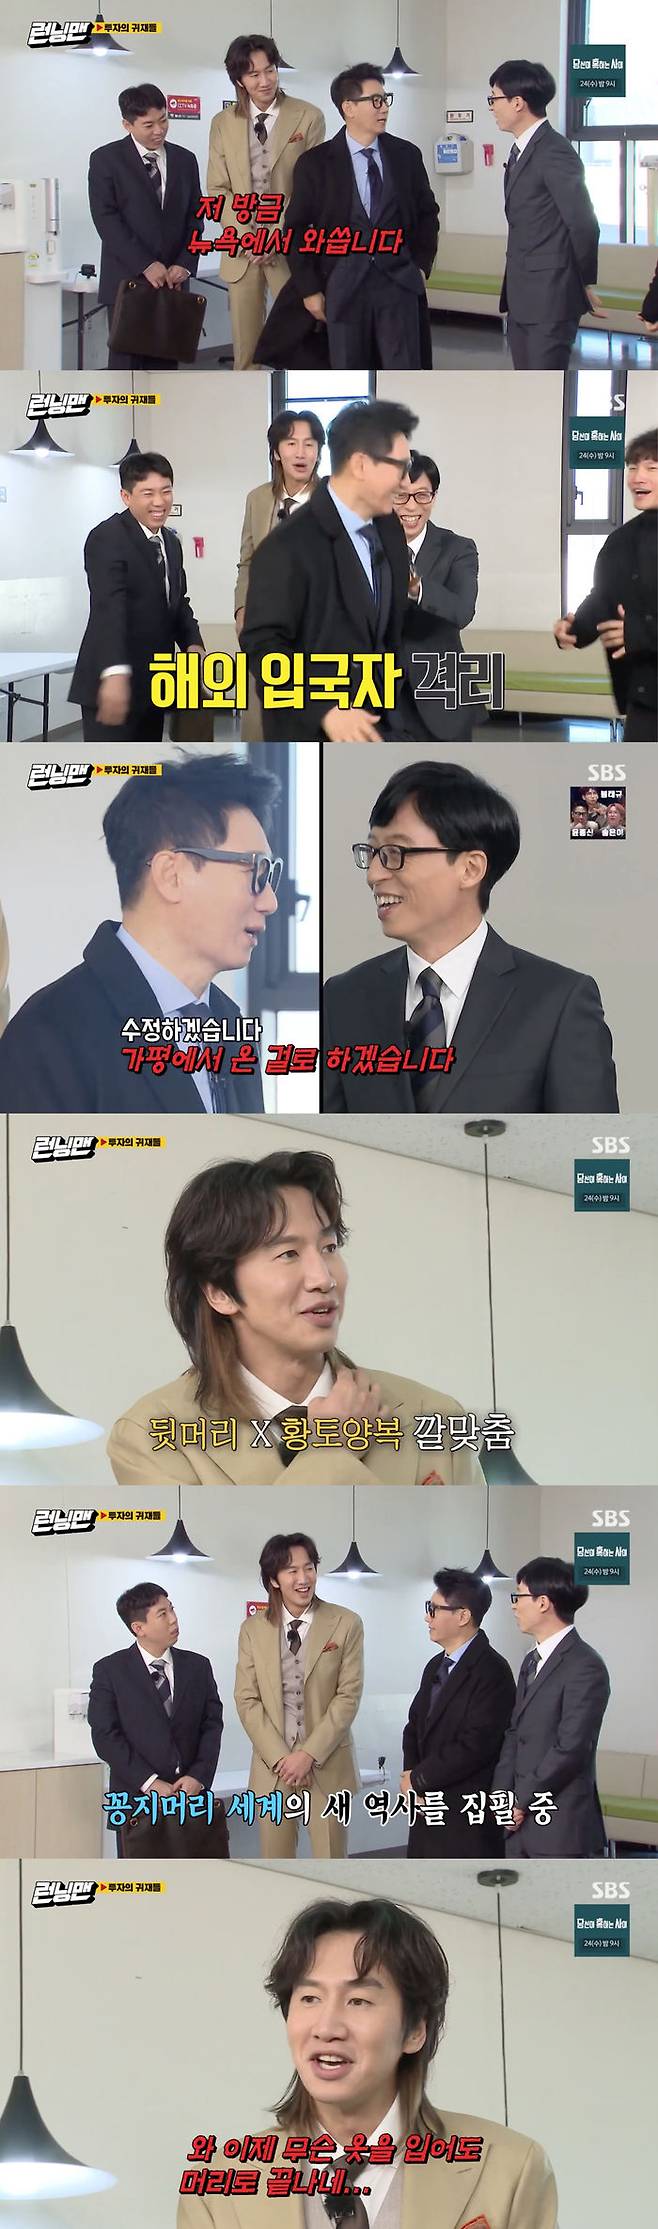 Lee Kwang-soos unique hairstyle caught the eye.On SBS Running Man broadcasted on the 21st, Race of Investment was held.On the day of the show, the members who participated in the mock investment contest appeared in each concept. Ji Suk-jin watched Yang Se-chan and teased, It feels like 7,800 a year.And I caught my eye by saying that I just came from New York City.Yoo Jae-Suk then drove him out, saying, Do not you do self-price?I do not think its a professional investor because I wear shoes on suits, Ji Suk-jin explained as a trend for New Yorkers.Yoo Jae-Suk said, Have you ever been to New York City? Set the ark of the adlib.If you have been to New York City, you have to go to Jassari. Ji Suk-jin said, I will revise it. I will come from Gapyeong. And the members said that they would not have worked at all while watching Kim Jong-kook, and Kim Jong-kook laughed, saying, I am from a third financial institution.Lee Kwang-soos point of the back hair still remained this week, especially with a hairstyle that only dyed the buttocks.Yoo Jae-Suk laughed, I am wearing a new histories after Kim Byung-ji player, and Lee Kwang-soo was troubled by the situation that ended up with a head story.